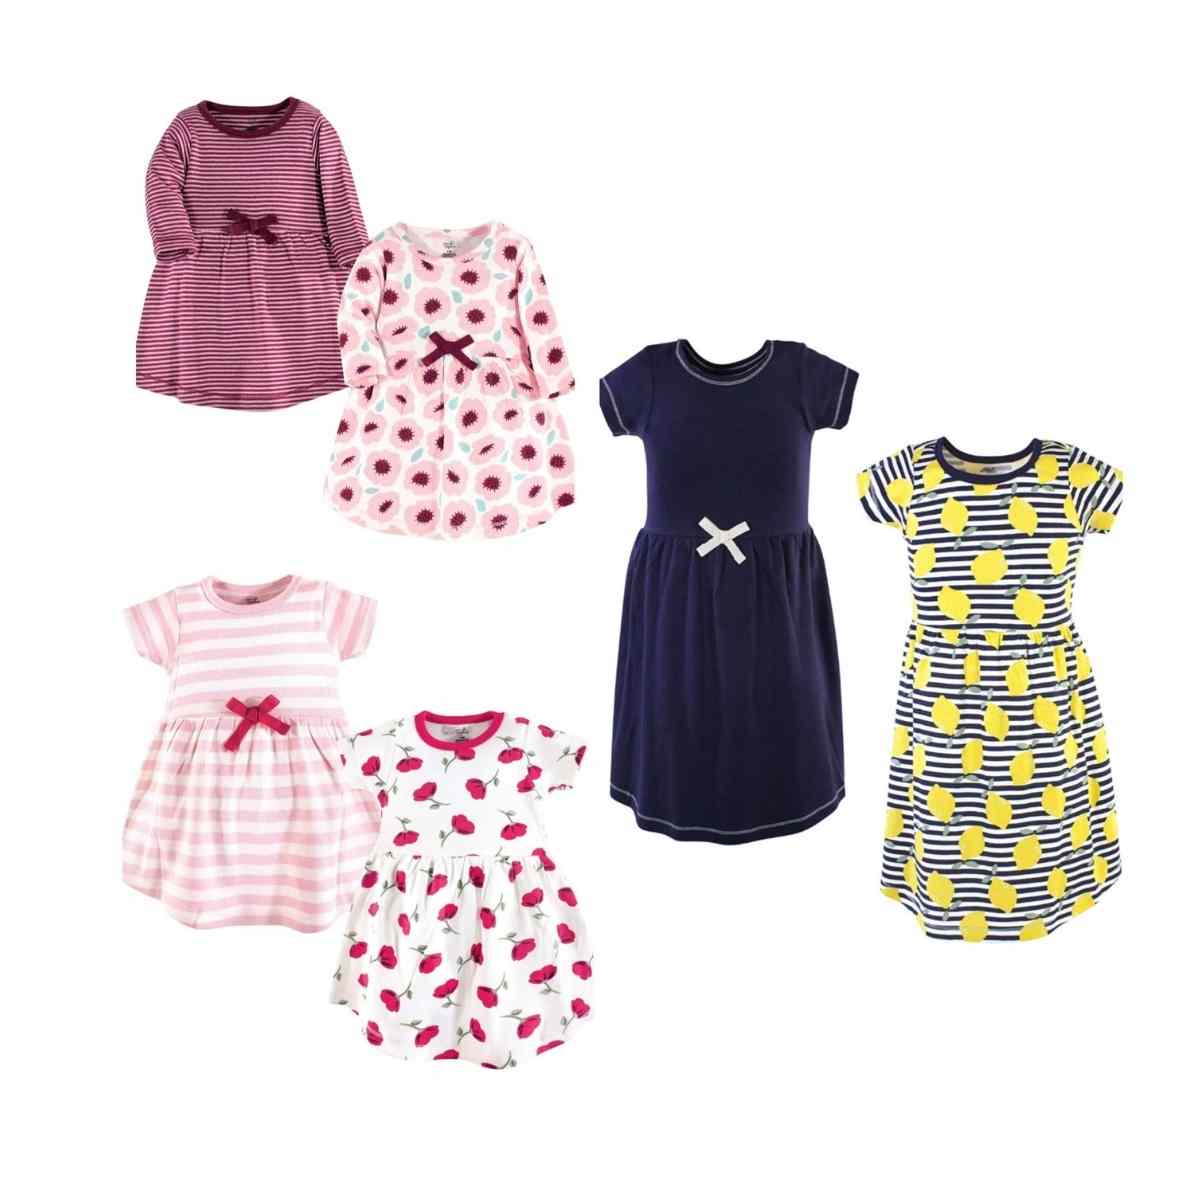 Touched by Nature Organic Cotton Dresses